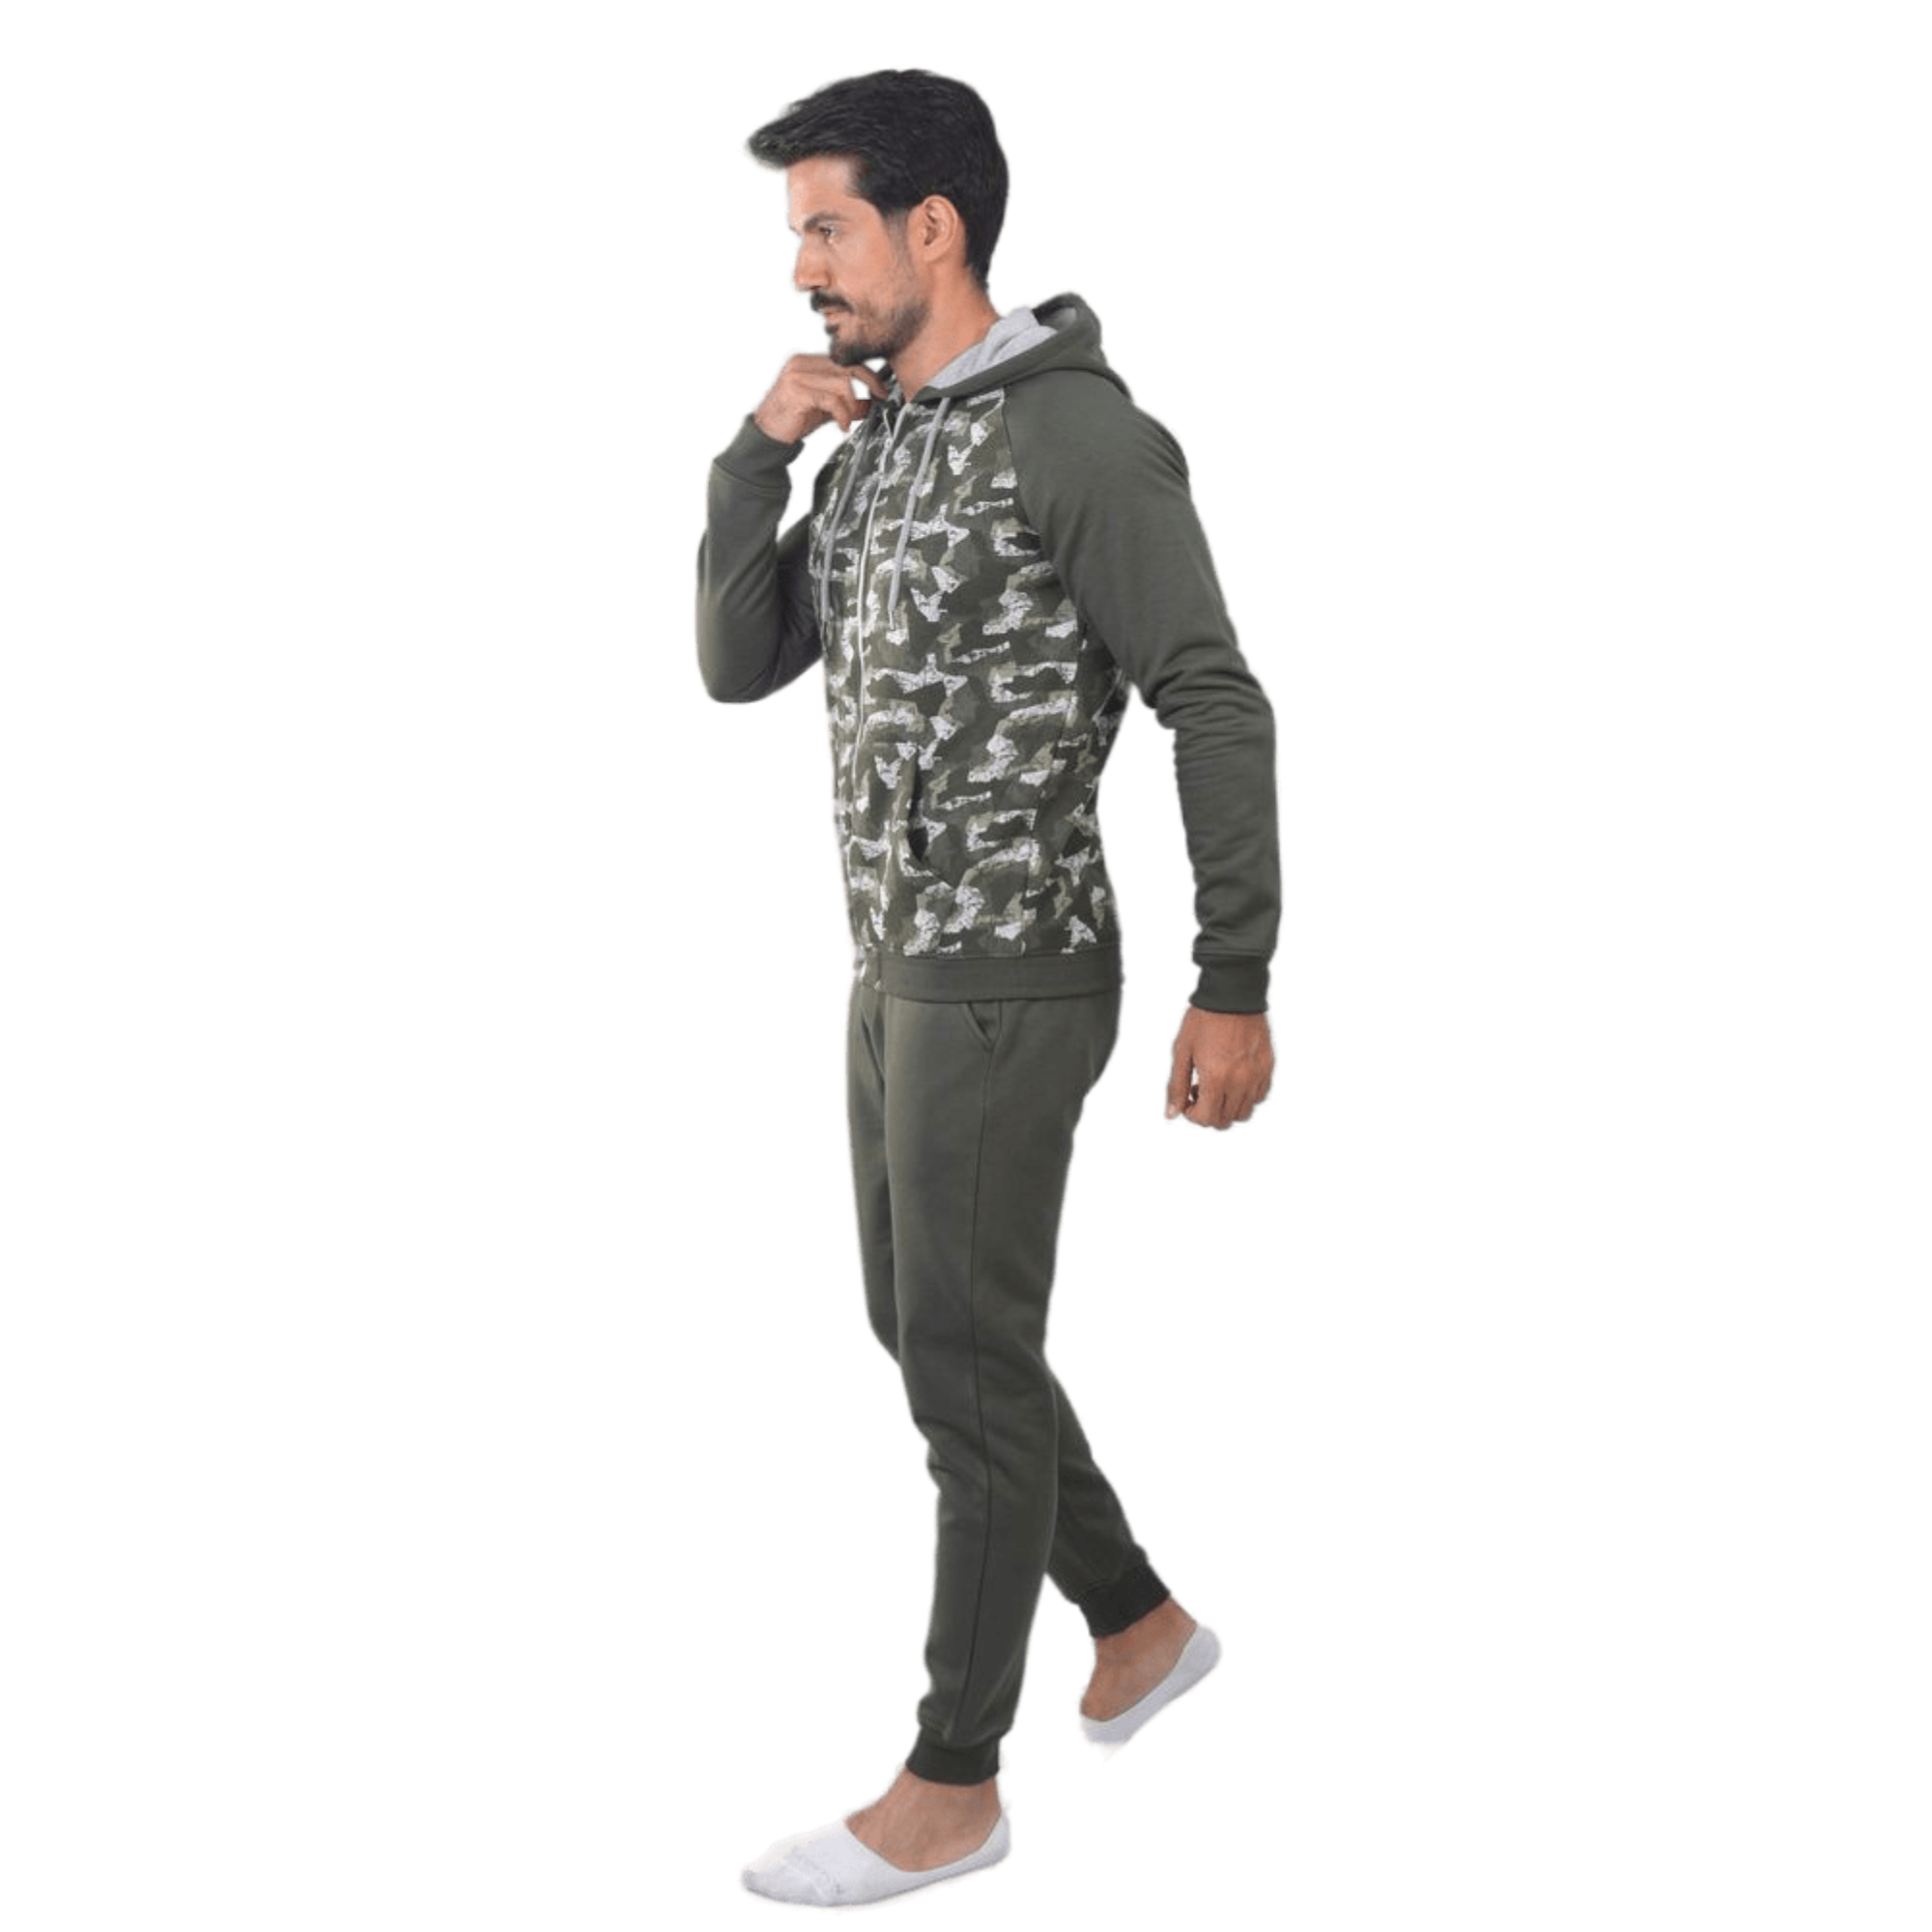 Men's Camo Green Winter Hoodie and Sweatpants Set - Stay Warm and Fashionable.